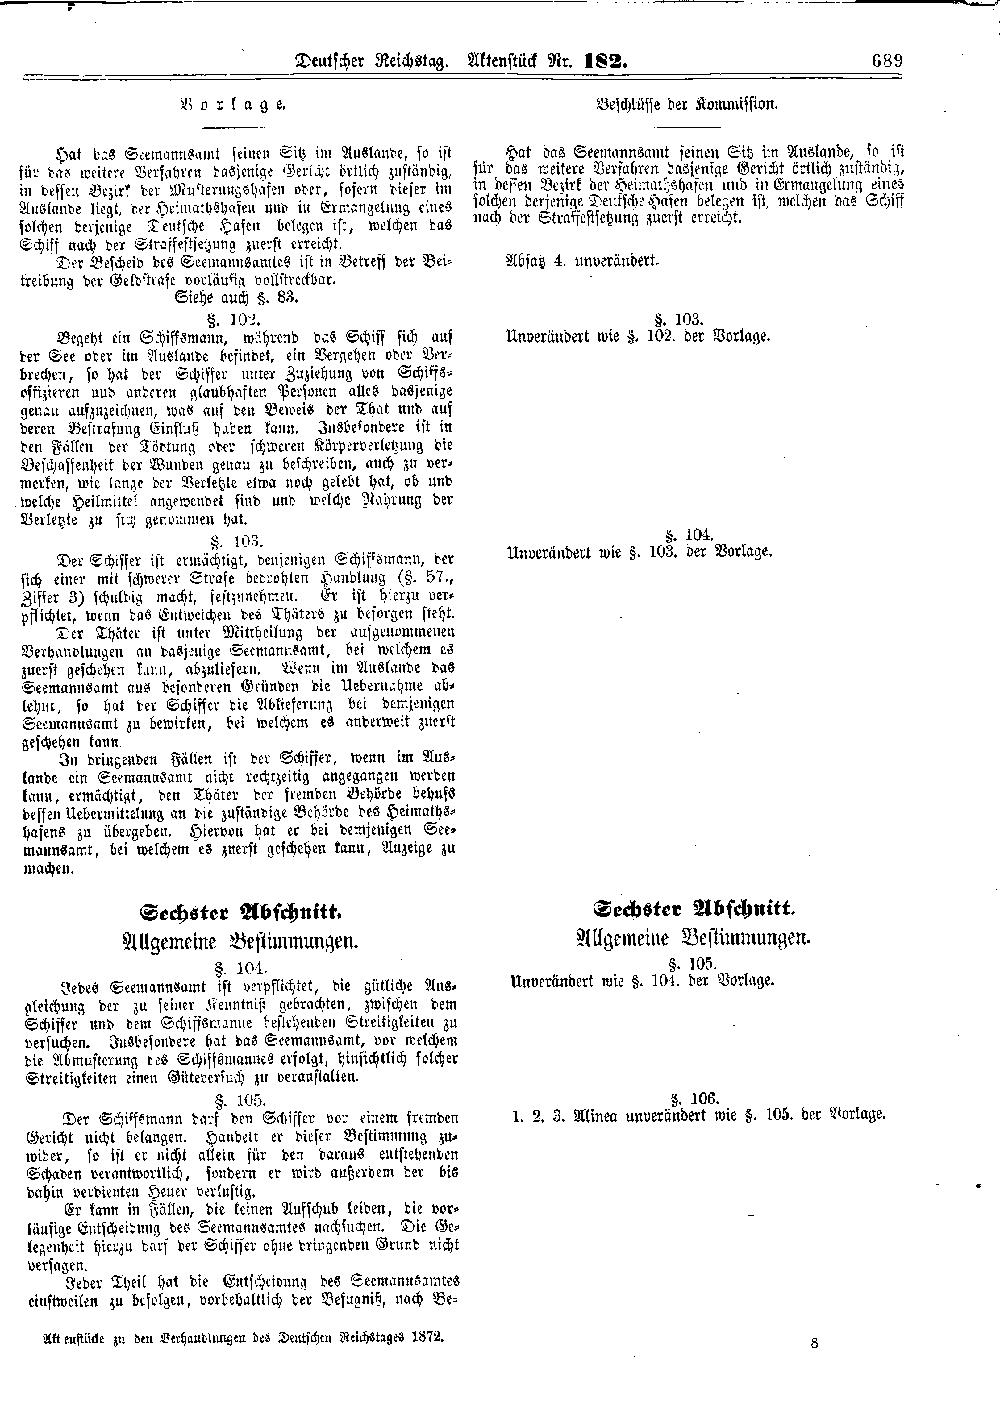 Scan of page 689